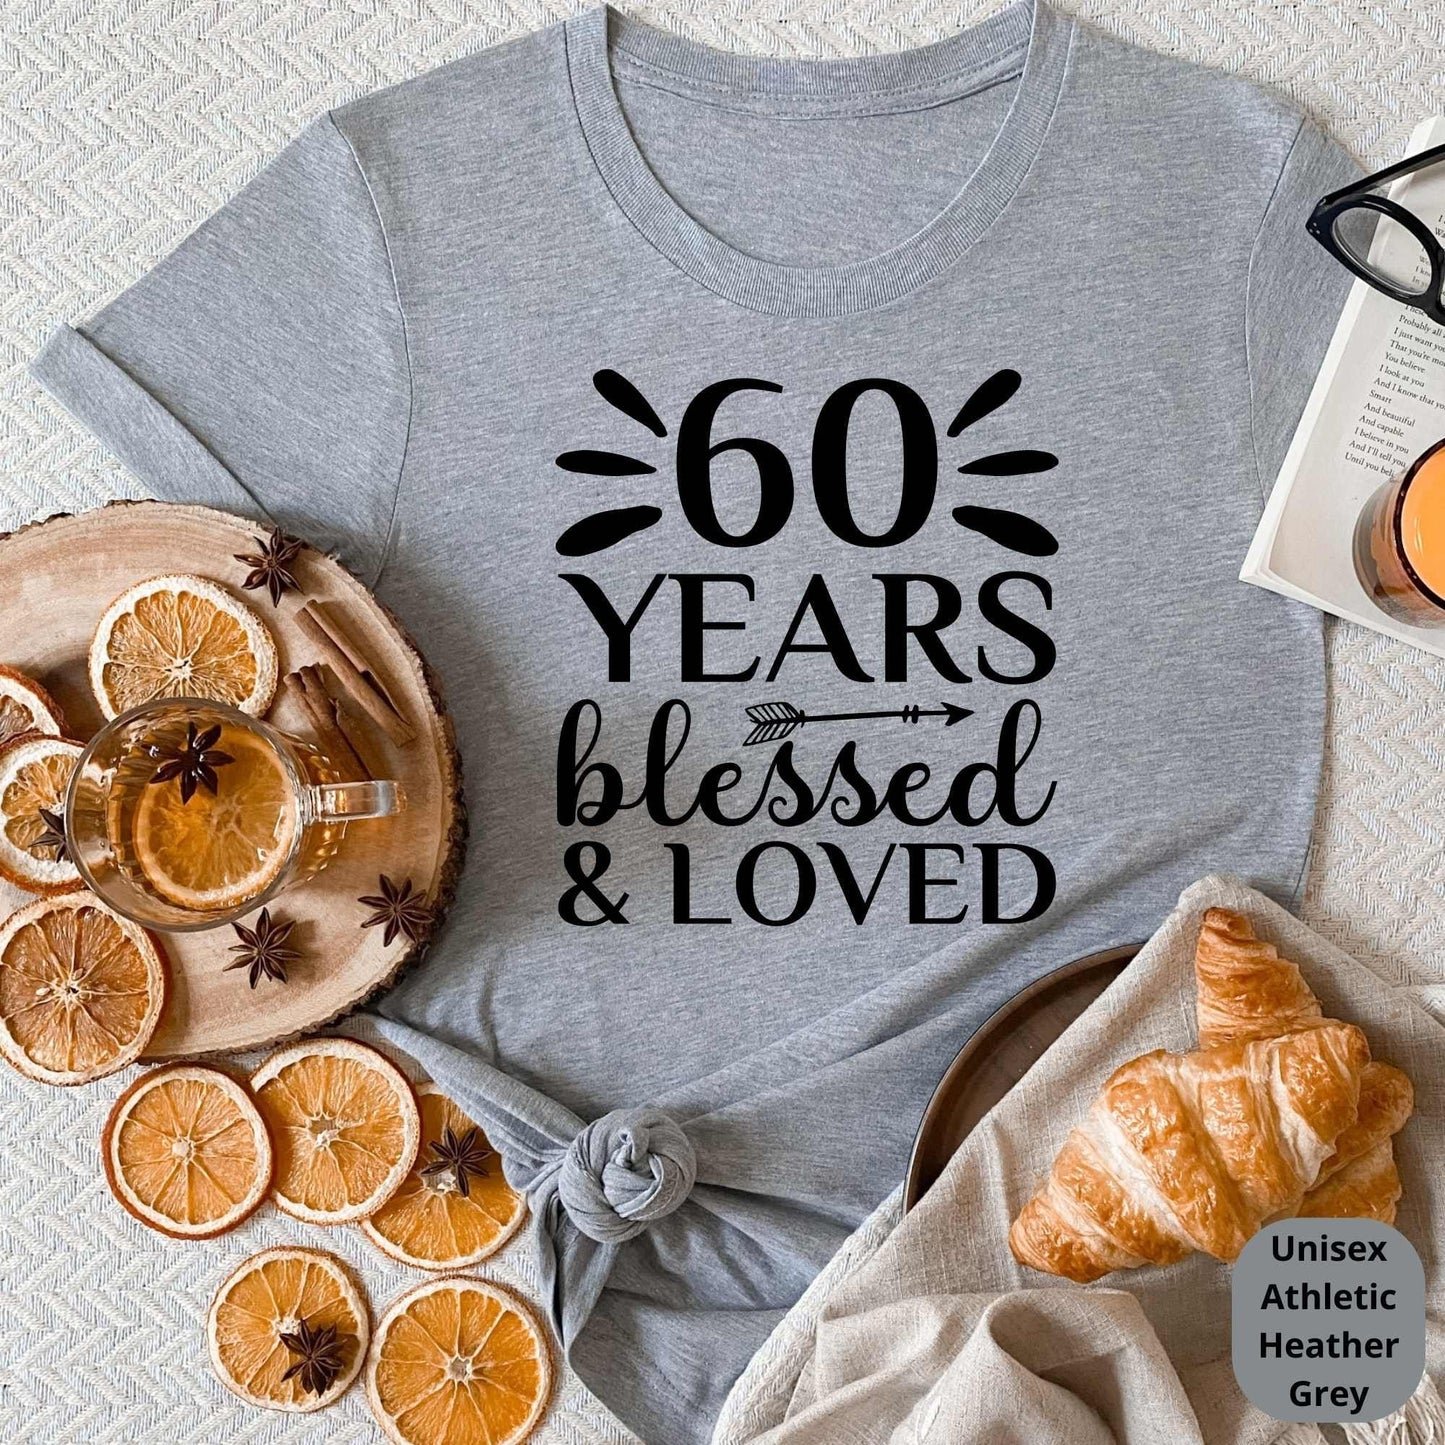 60th Birthday Shirt, 60 Birthday Gift, 60 Years Blessed for Grands, Parents, Aunt, Cousins Bday Party or Wedding Anniversary Celebration HMDesignStudioUS